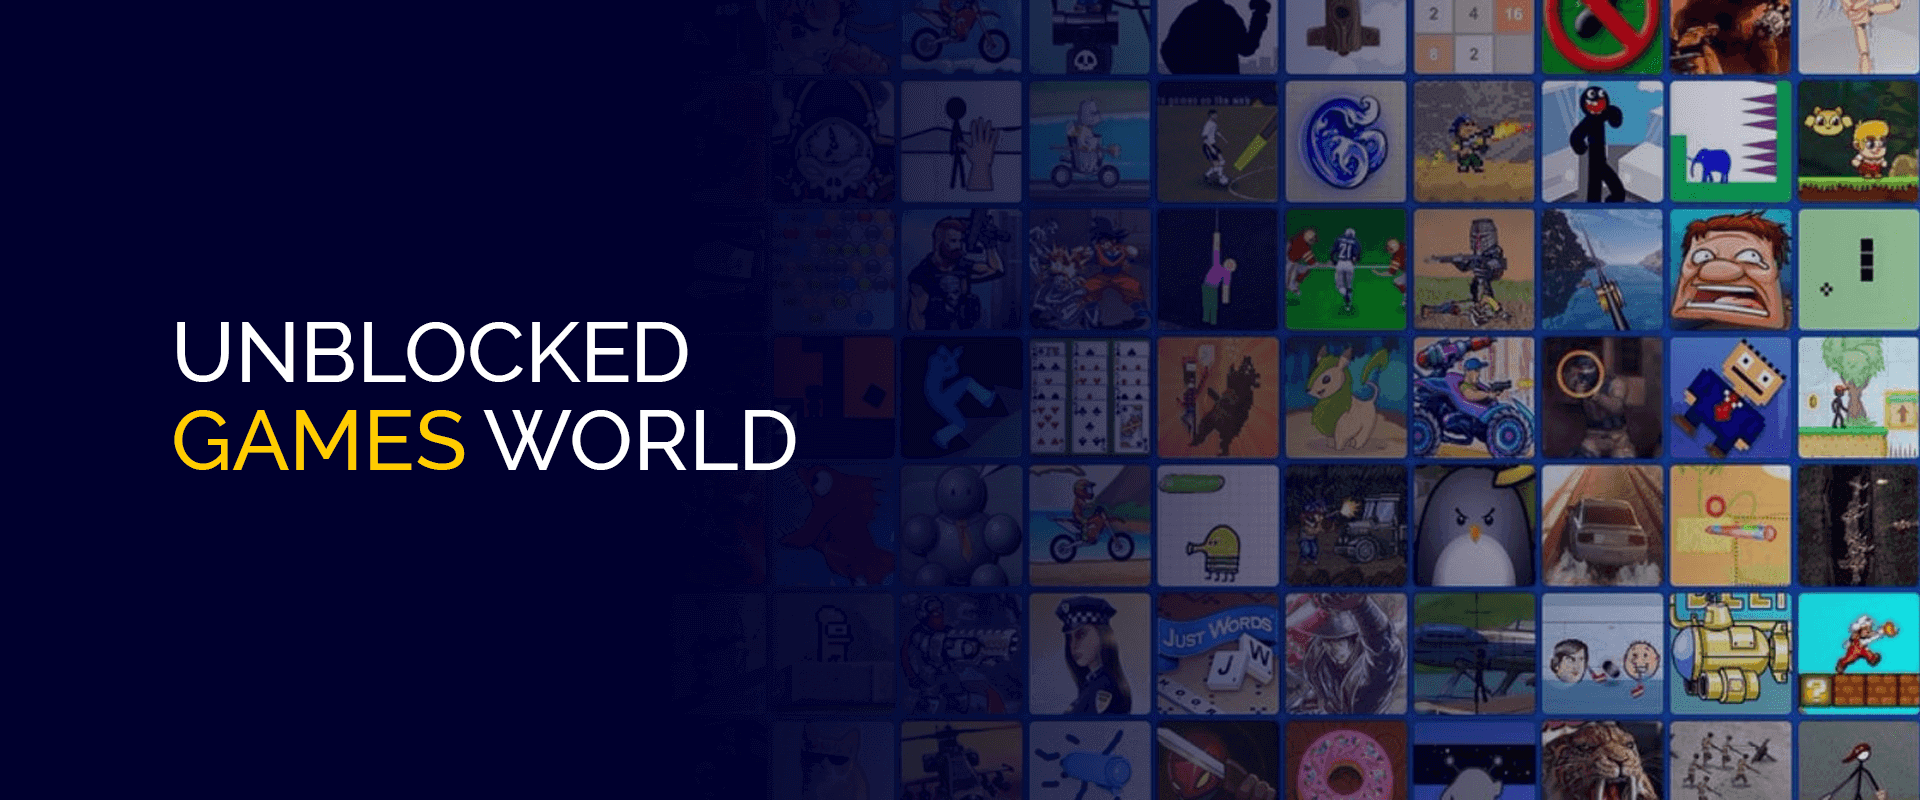 Unblocked Games World An Incredible Way to Experience Unrestricted Gaming Adventures